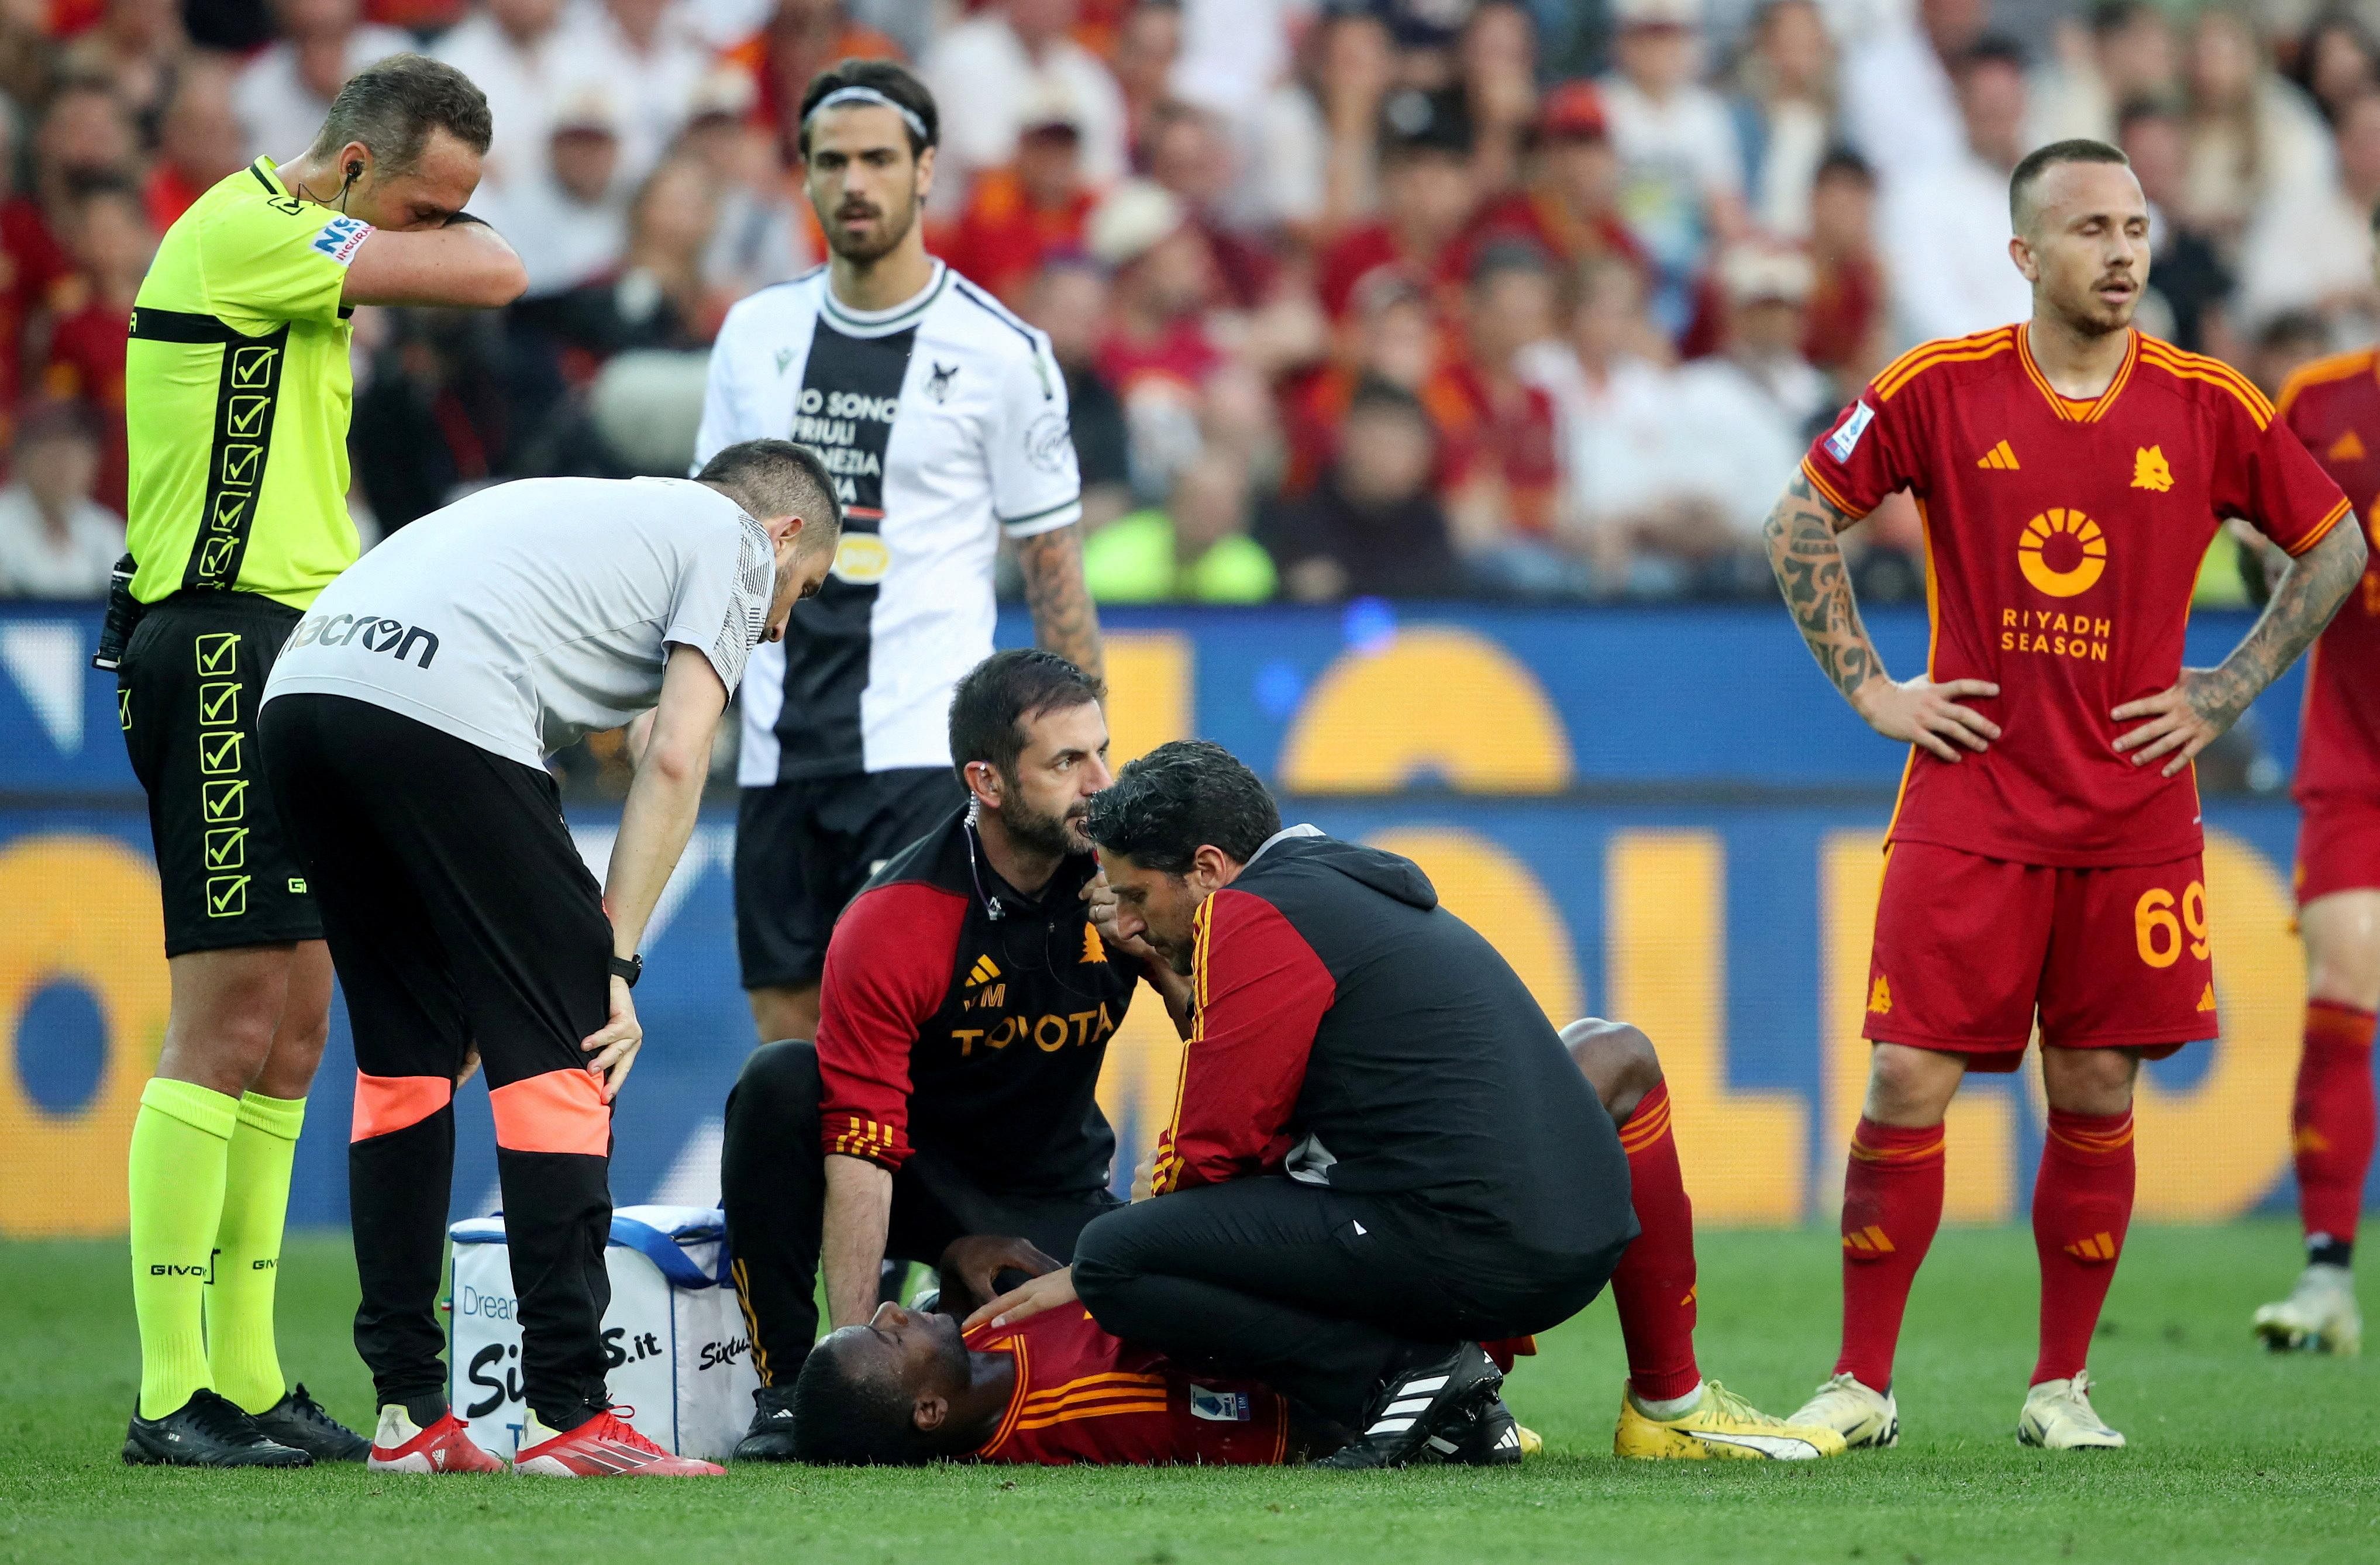 Roma defender Evan Ndicka collapses on pitch with match suspended